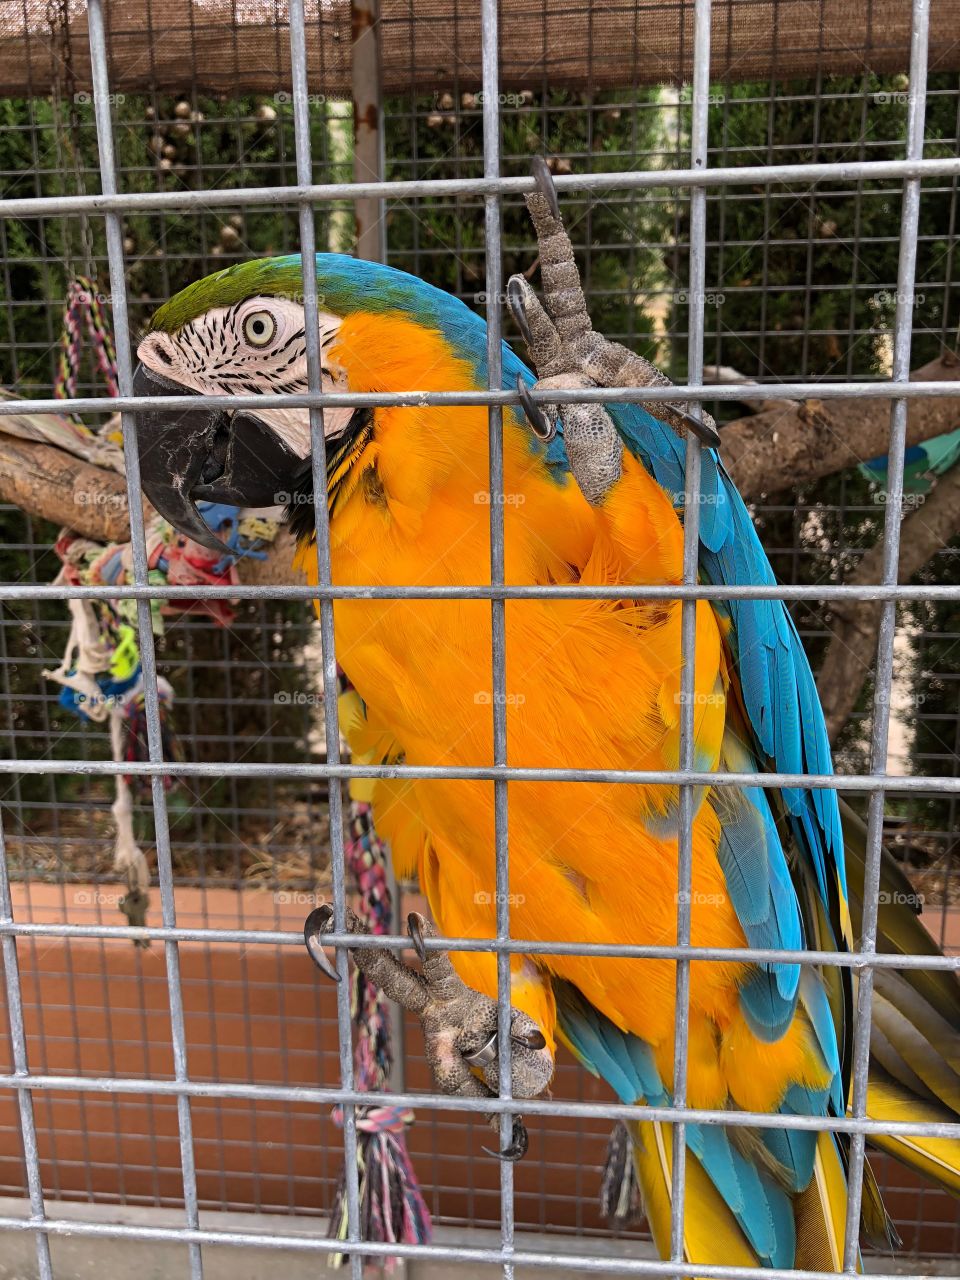 This parrot was Awsome🦜❤️ 